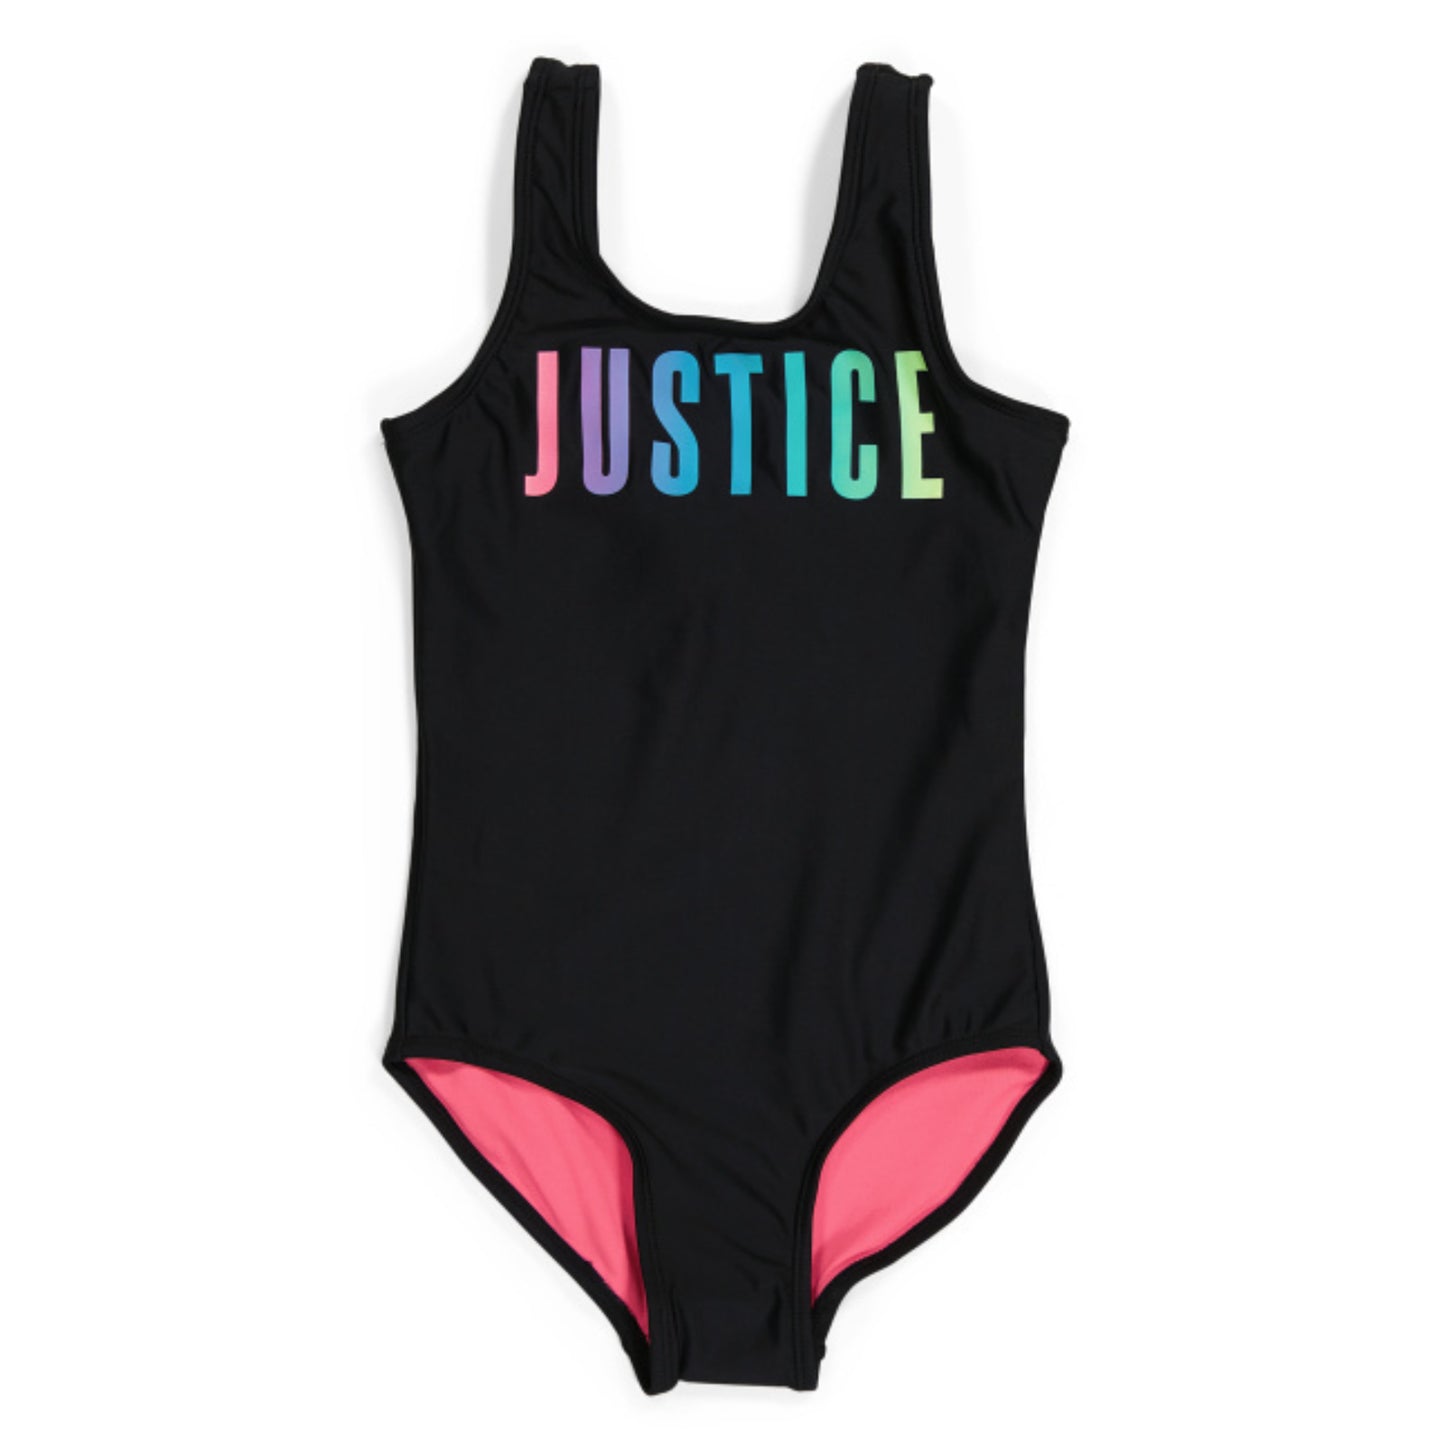 JUSTICE Girl's UPF 50+ Rainbow Colorful Logo Graphic Print One-piece Swimsuit